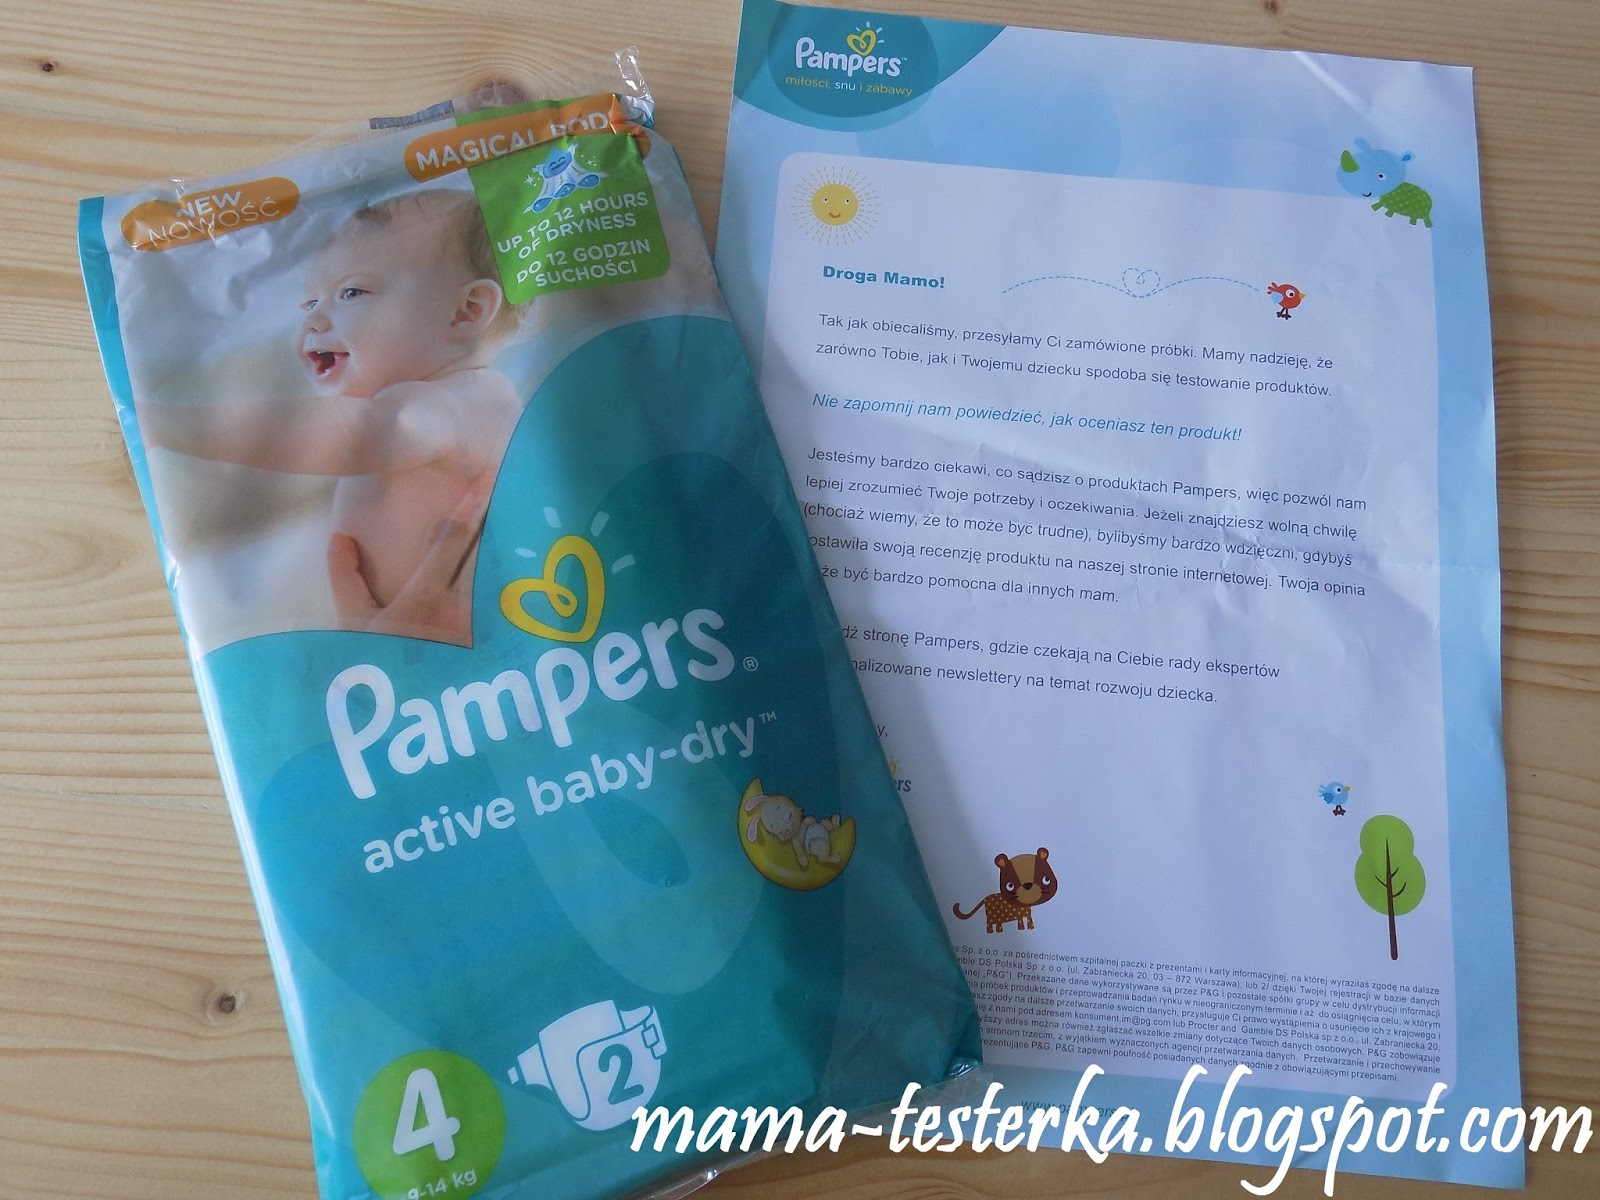 pampers 1 pro care rossmann